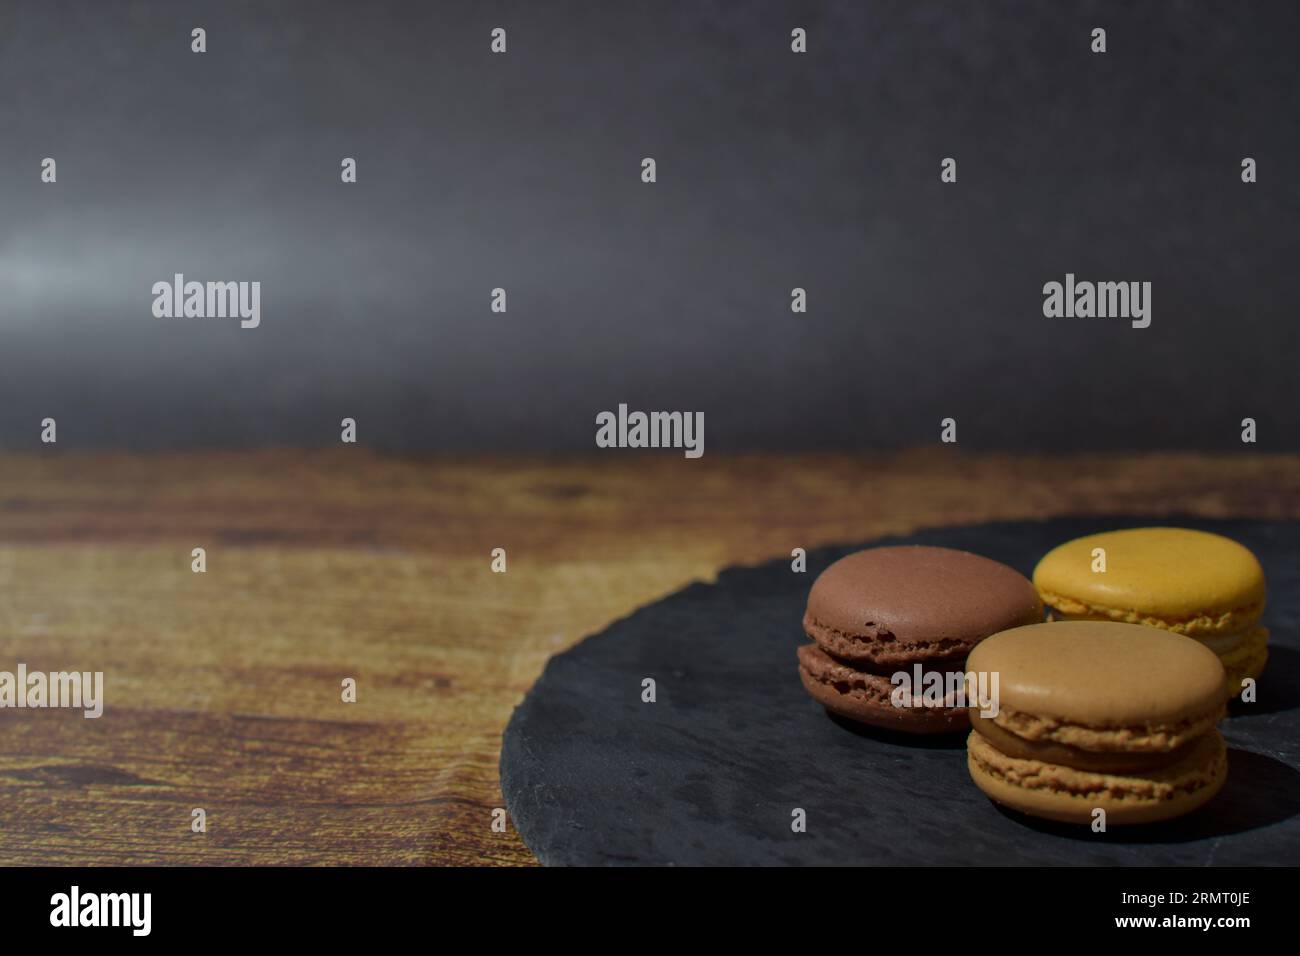 Macarons in brown and yellow tones, on a slate plate, on a wooden table Stock Photo